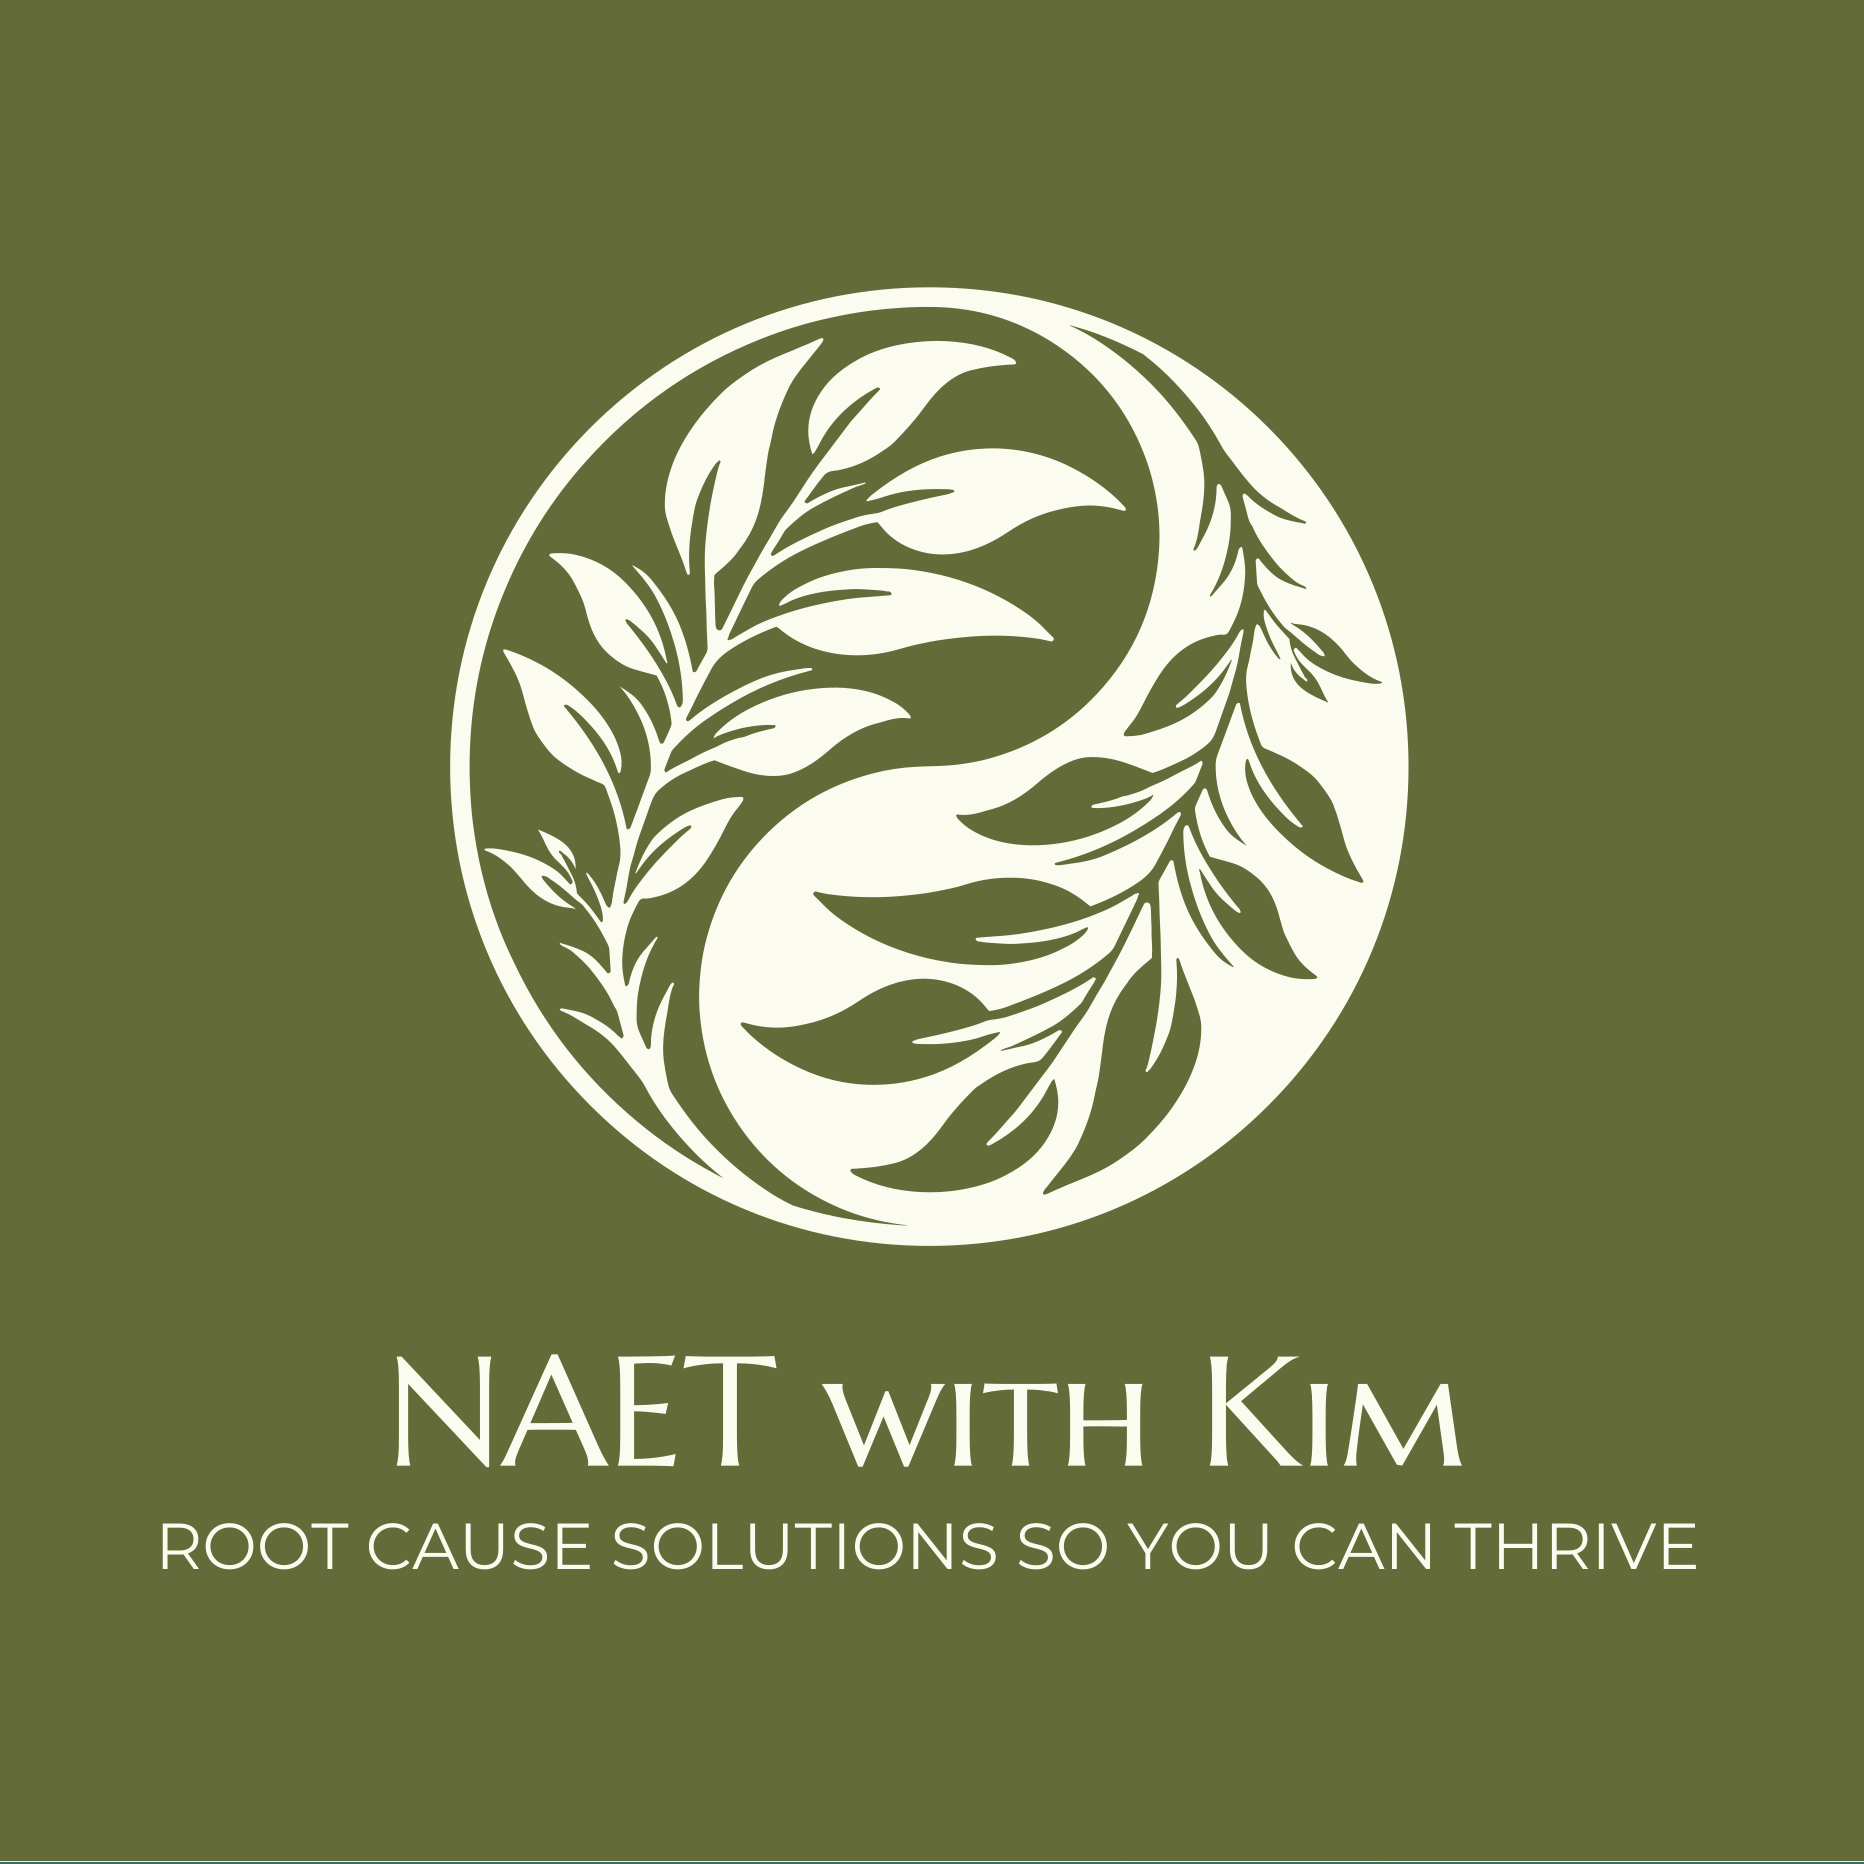 NAET with Kim